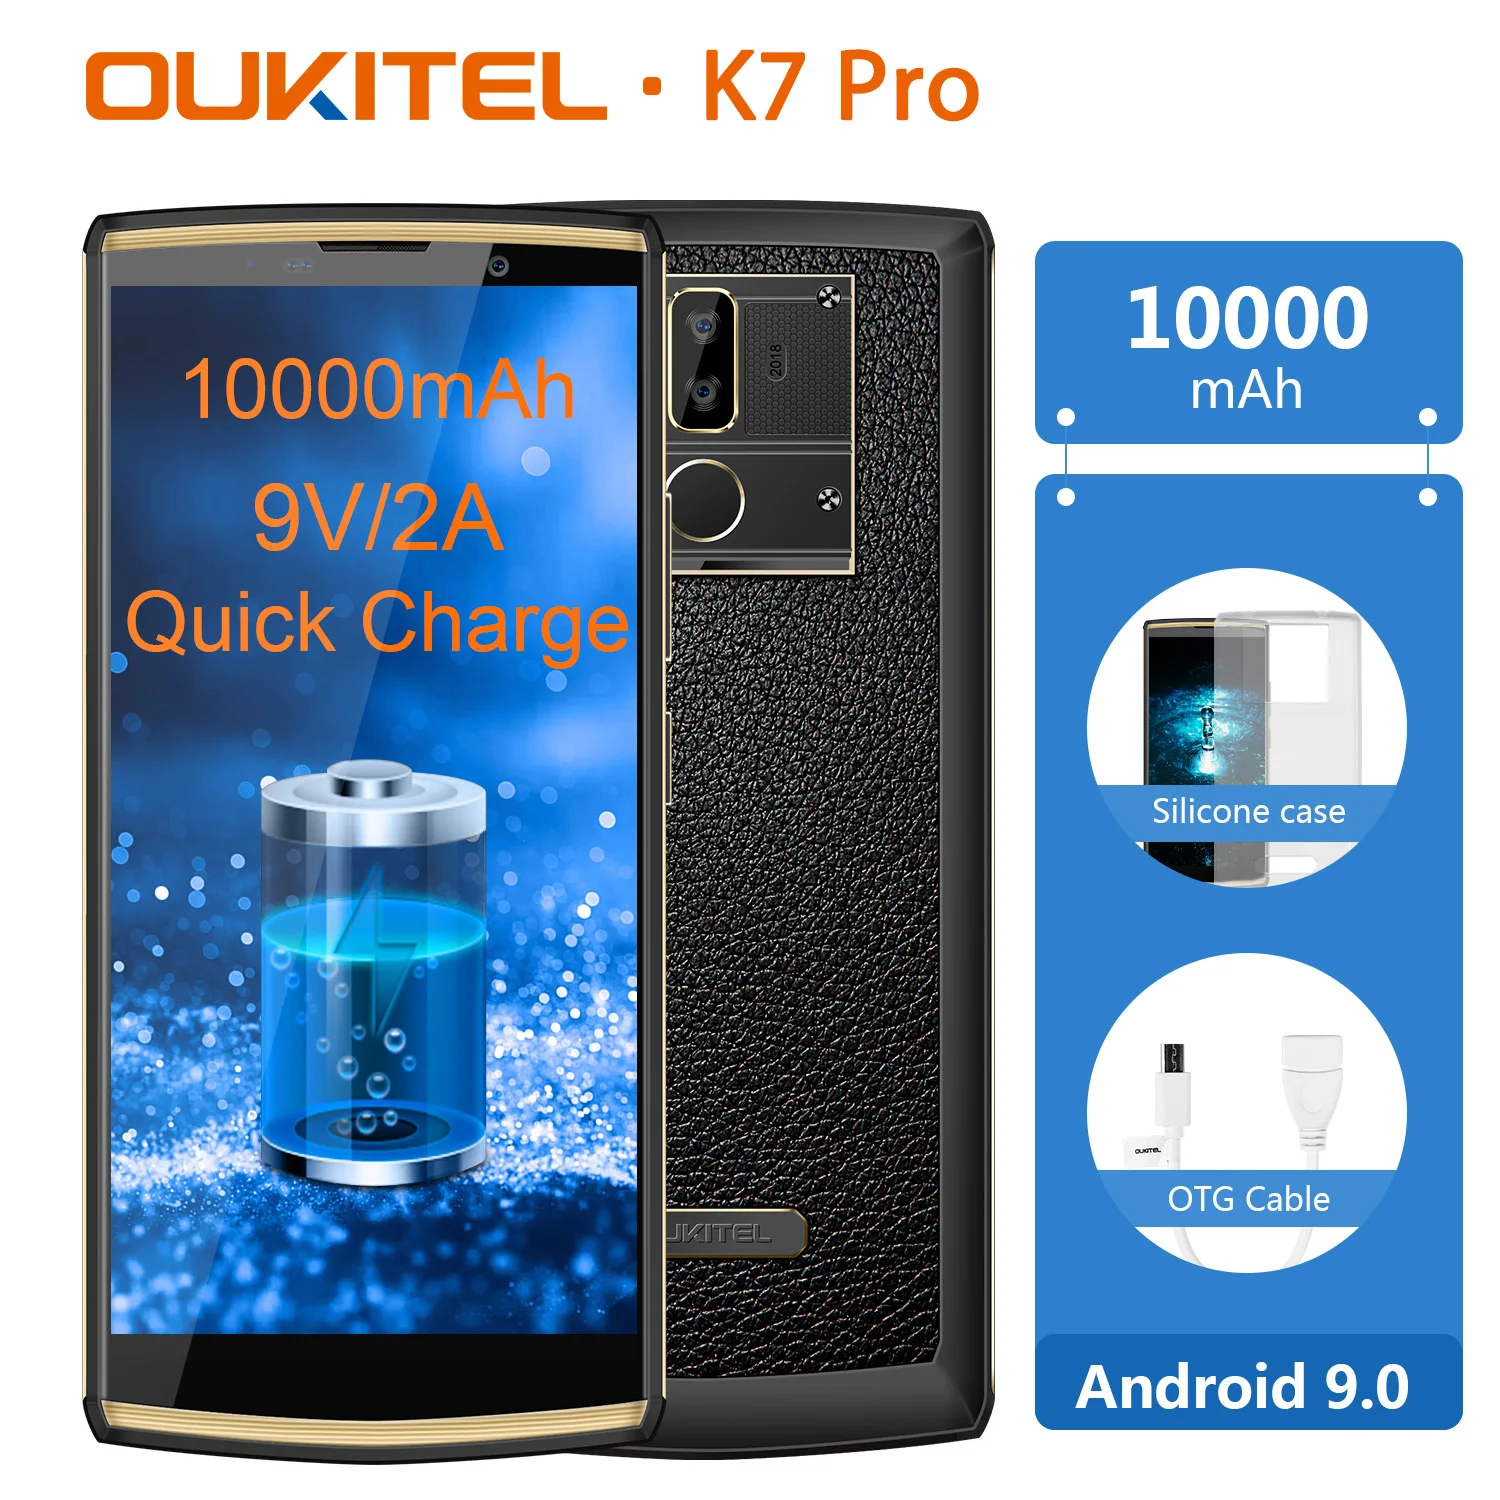 

OUKITEL K7 PRO 6.0" 4GB RAM 64GB ROM Octa Core Android 9.0 MT6763 Smartphone 13MP+5MP 10000mAh Battery 9V/2A 4G LTE Mobile Phone